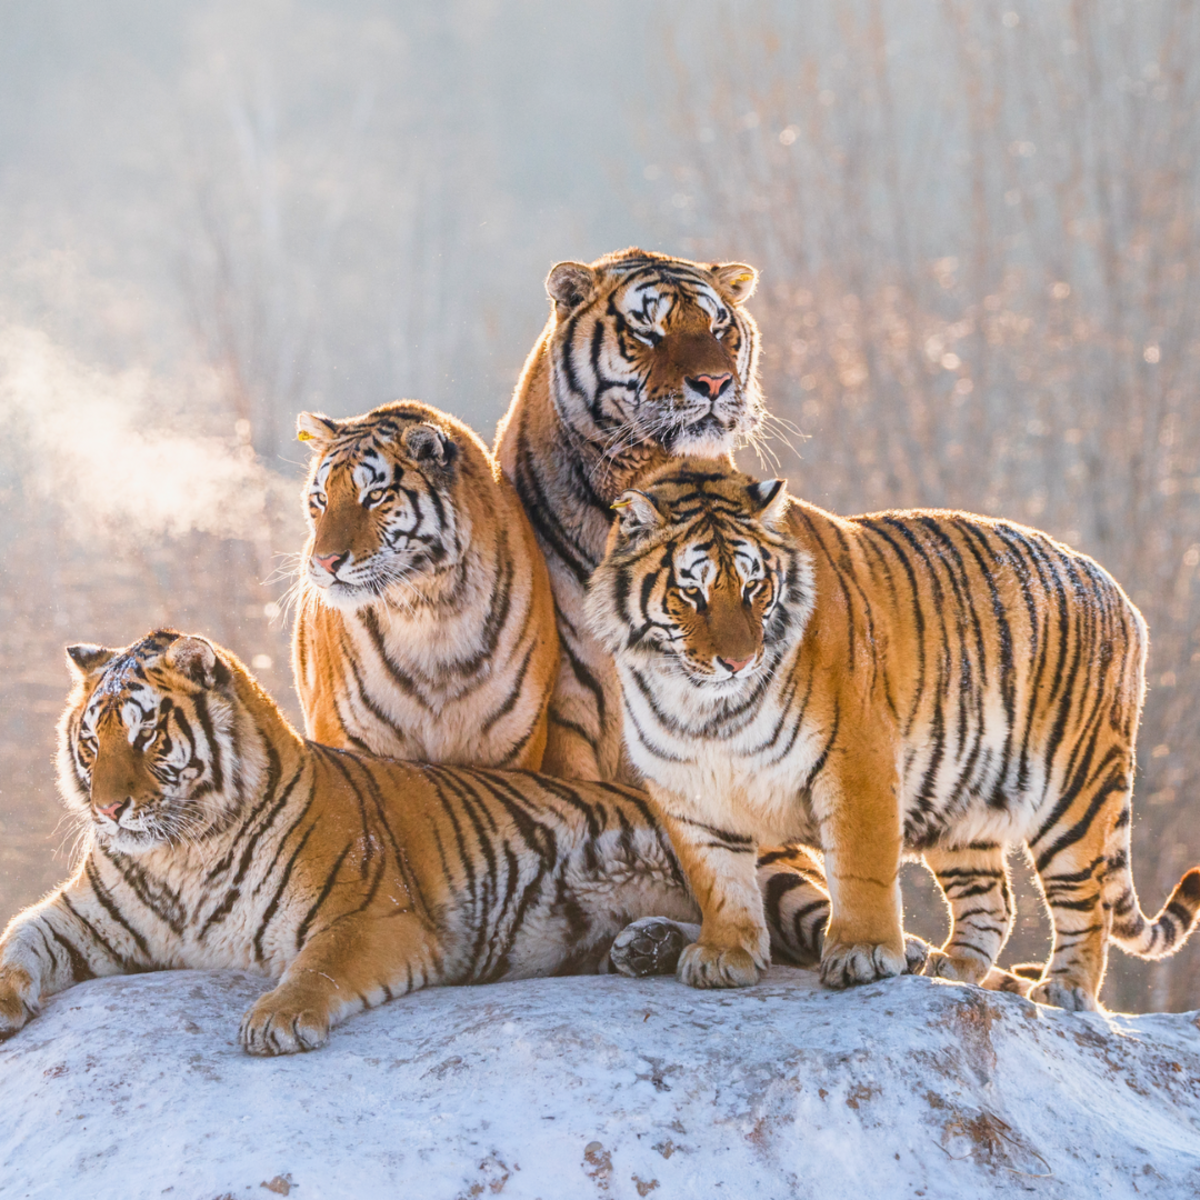 Den Mother Mother's Day Tigers Tiger Cubs and Mom 